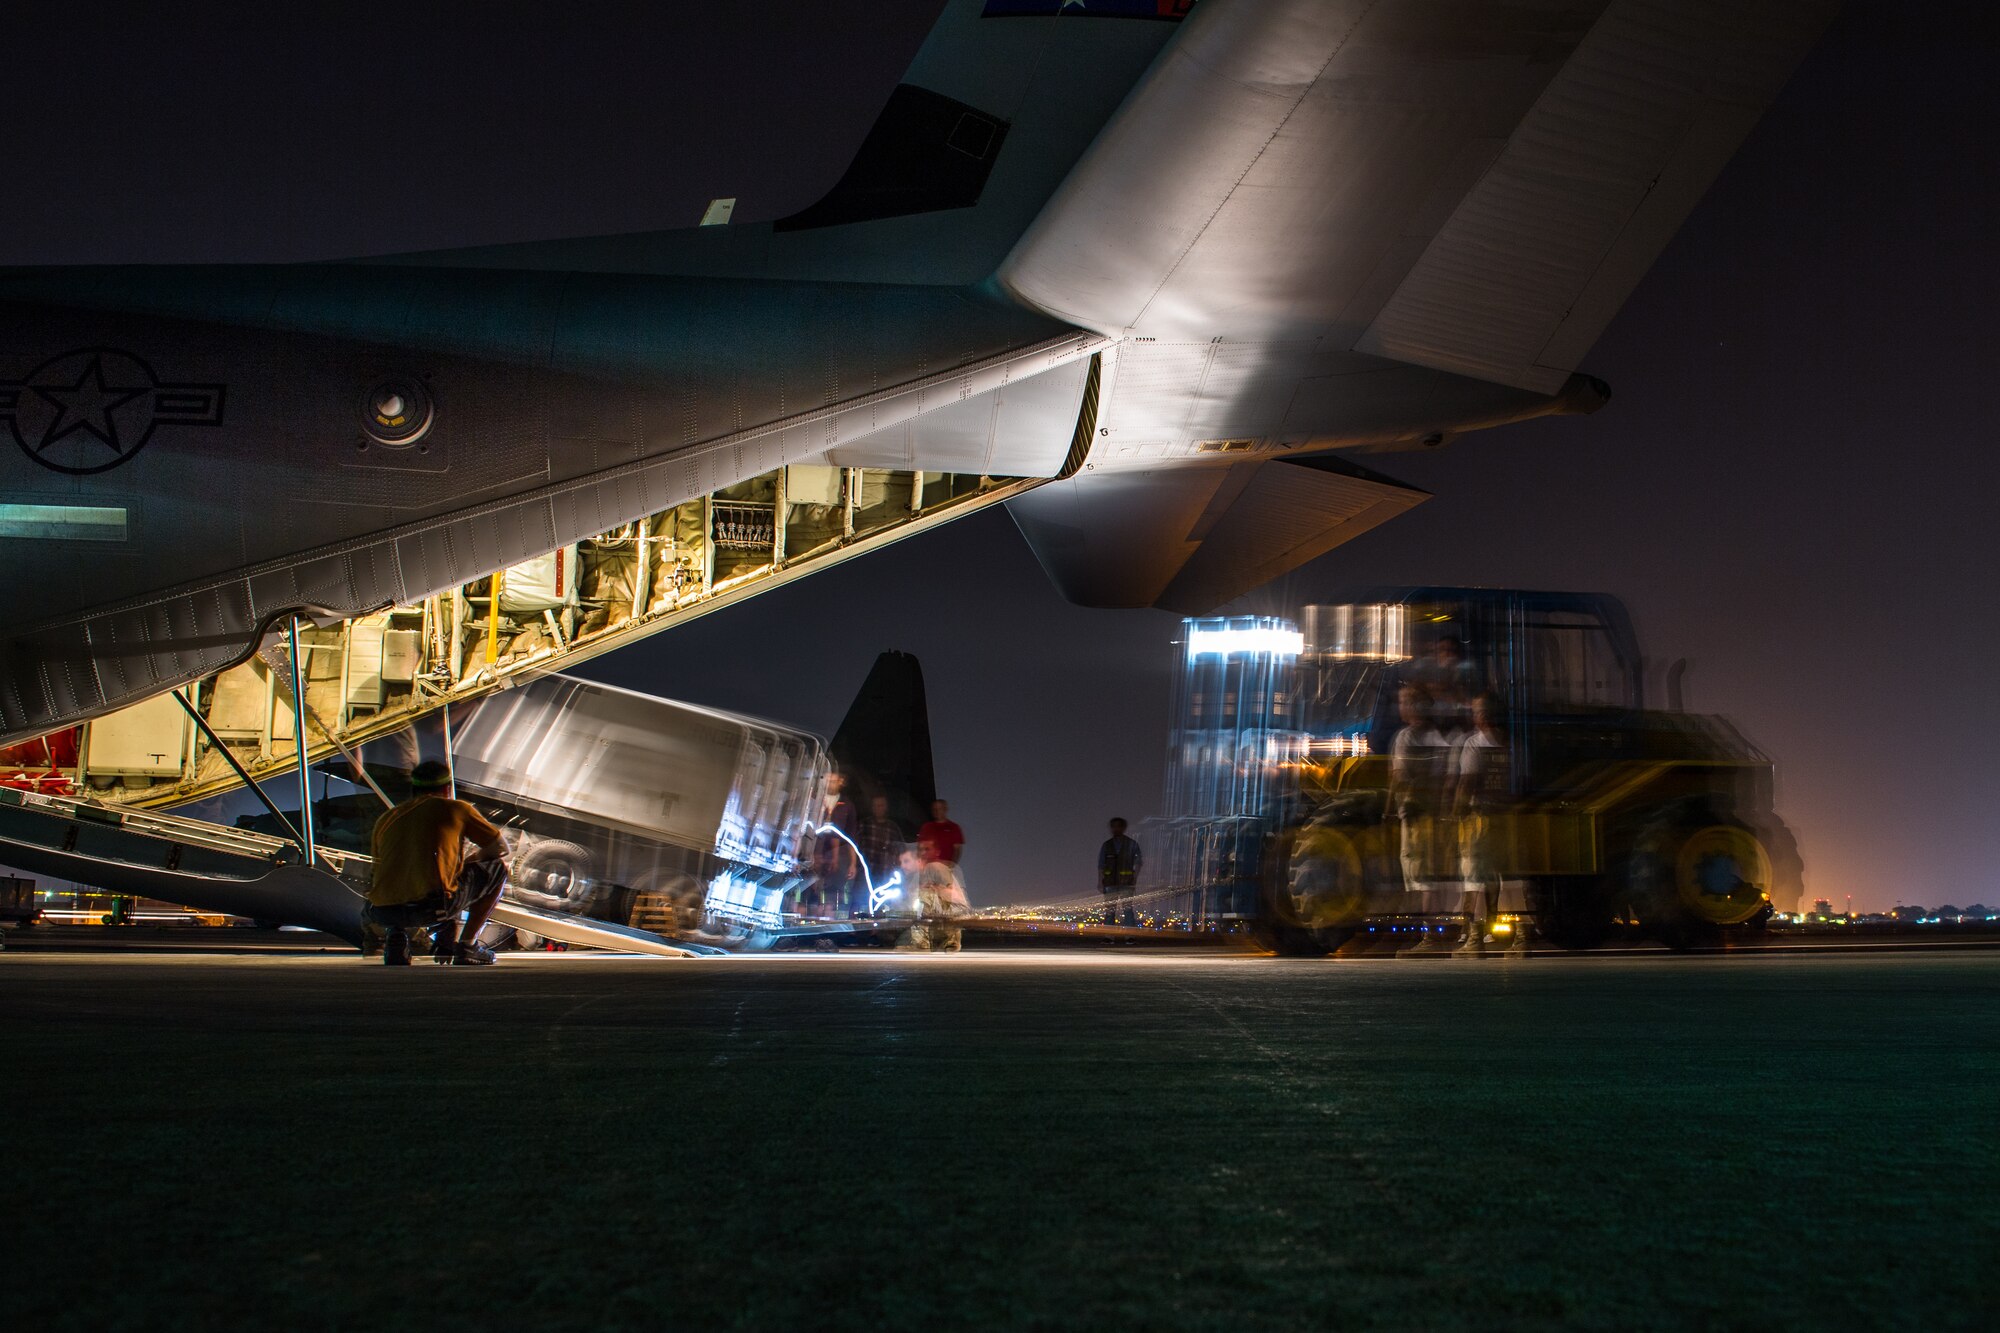 U.S. Air Force Airmen assigned to the 75th Expeditionary Airlift Squadron load a generator onto a C-130J Super Hercules at Camp Lemonnier, Djibouti, June 5, 2019. The 75th EAS provides support in medical evacuations, disaster relief, humanitarian and airdrop operations. (U.S. Air Force photo by Staff Sgt. Devin Boyer)